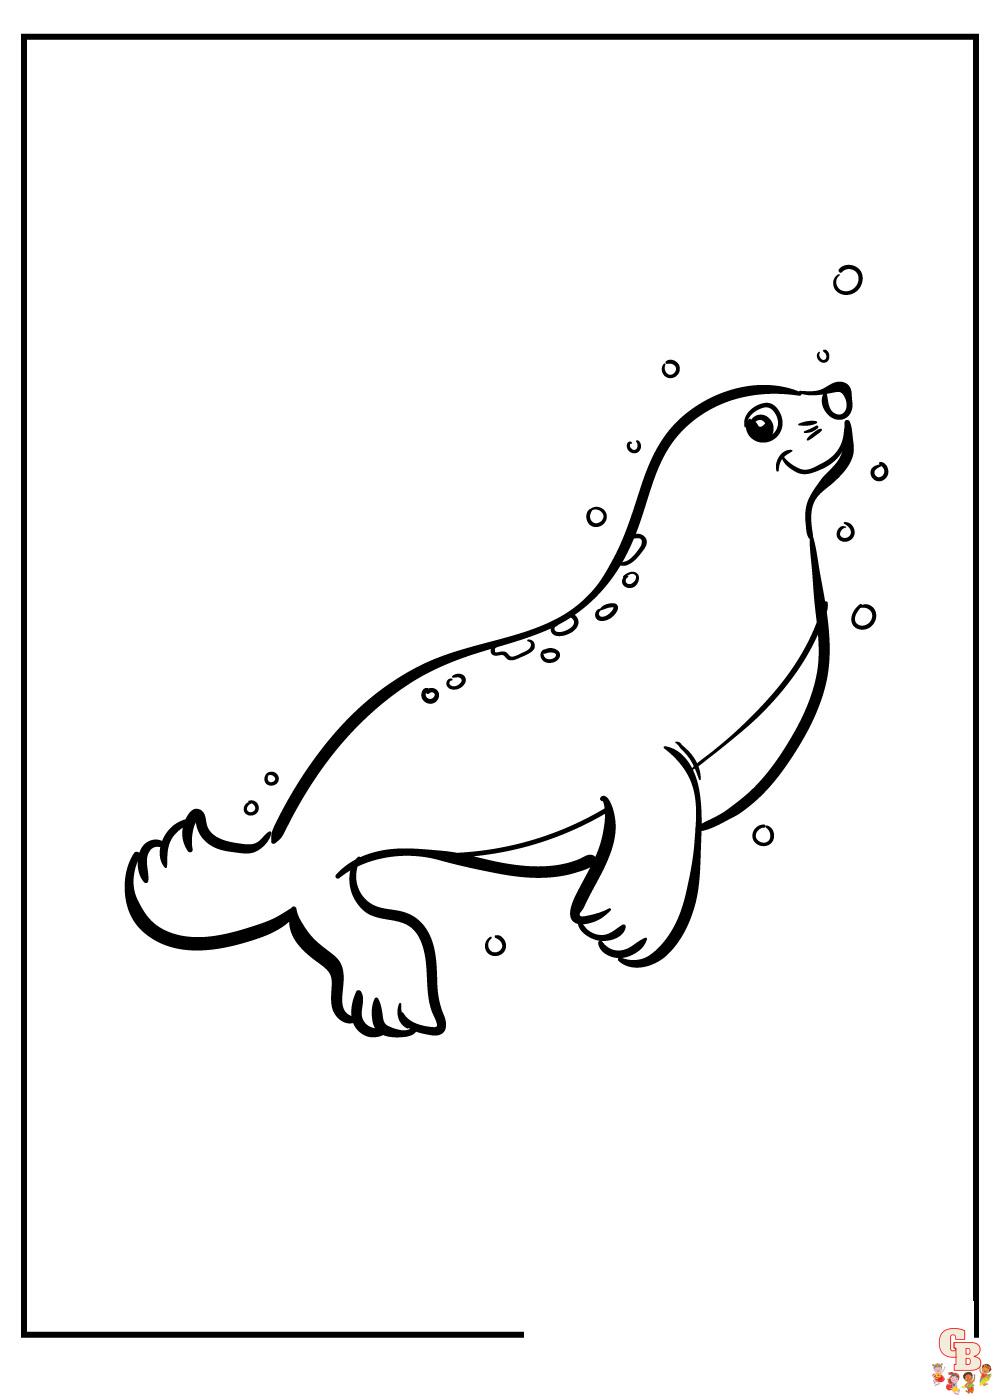 Seal Coloring Pages for kids